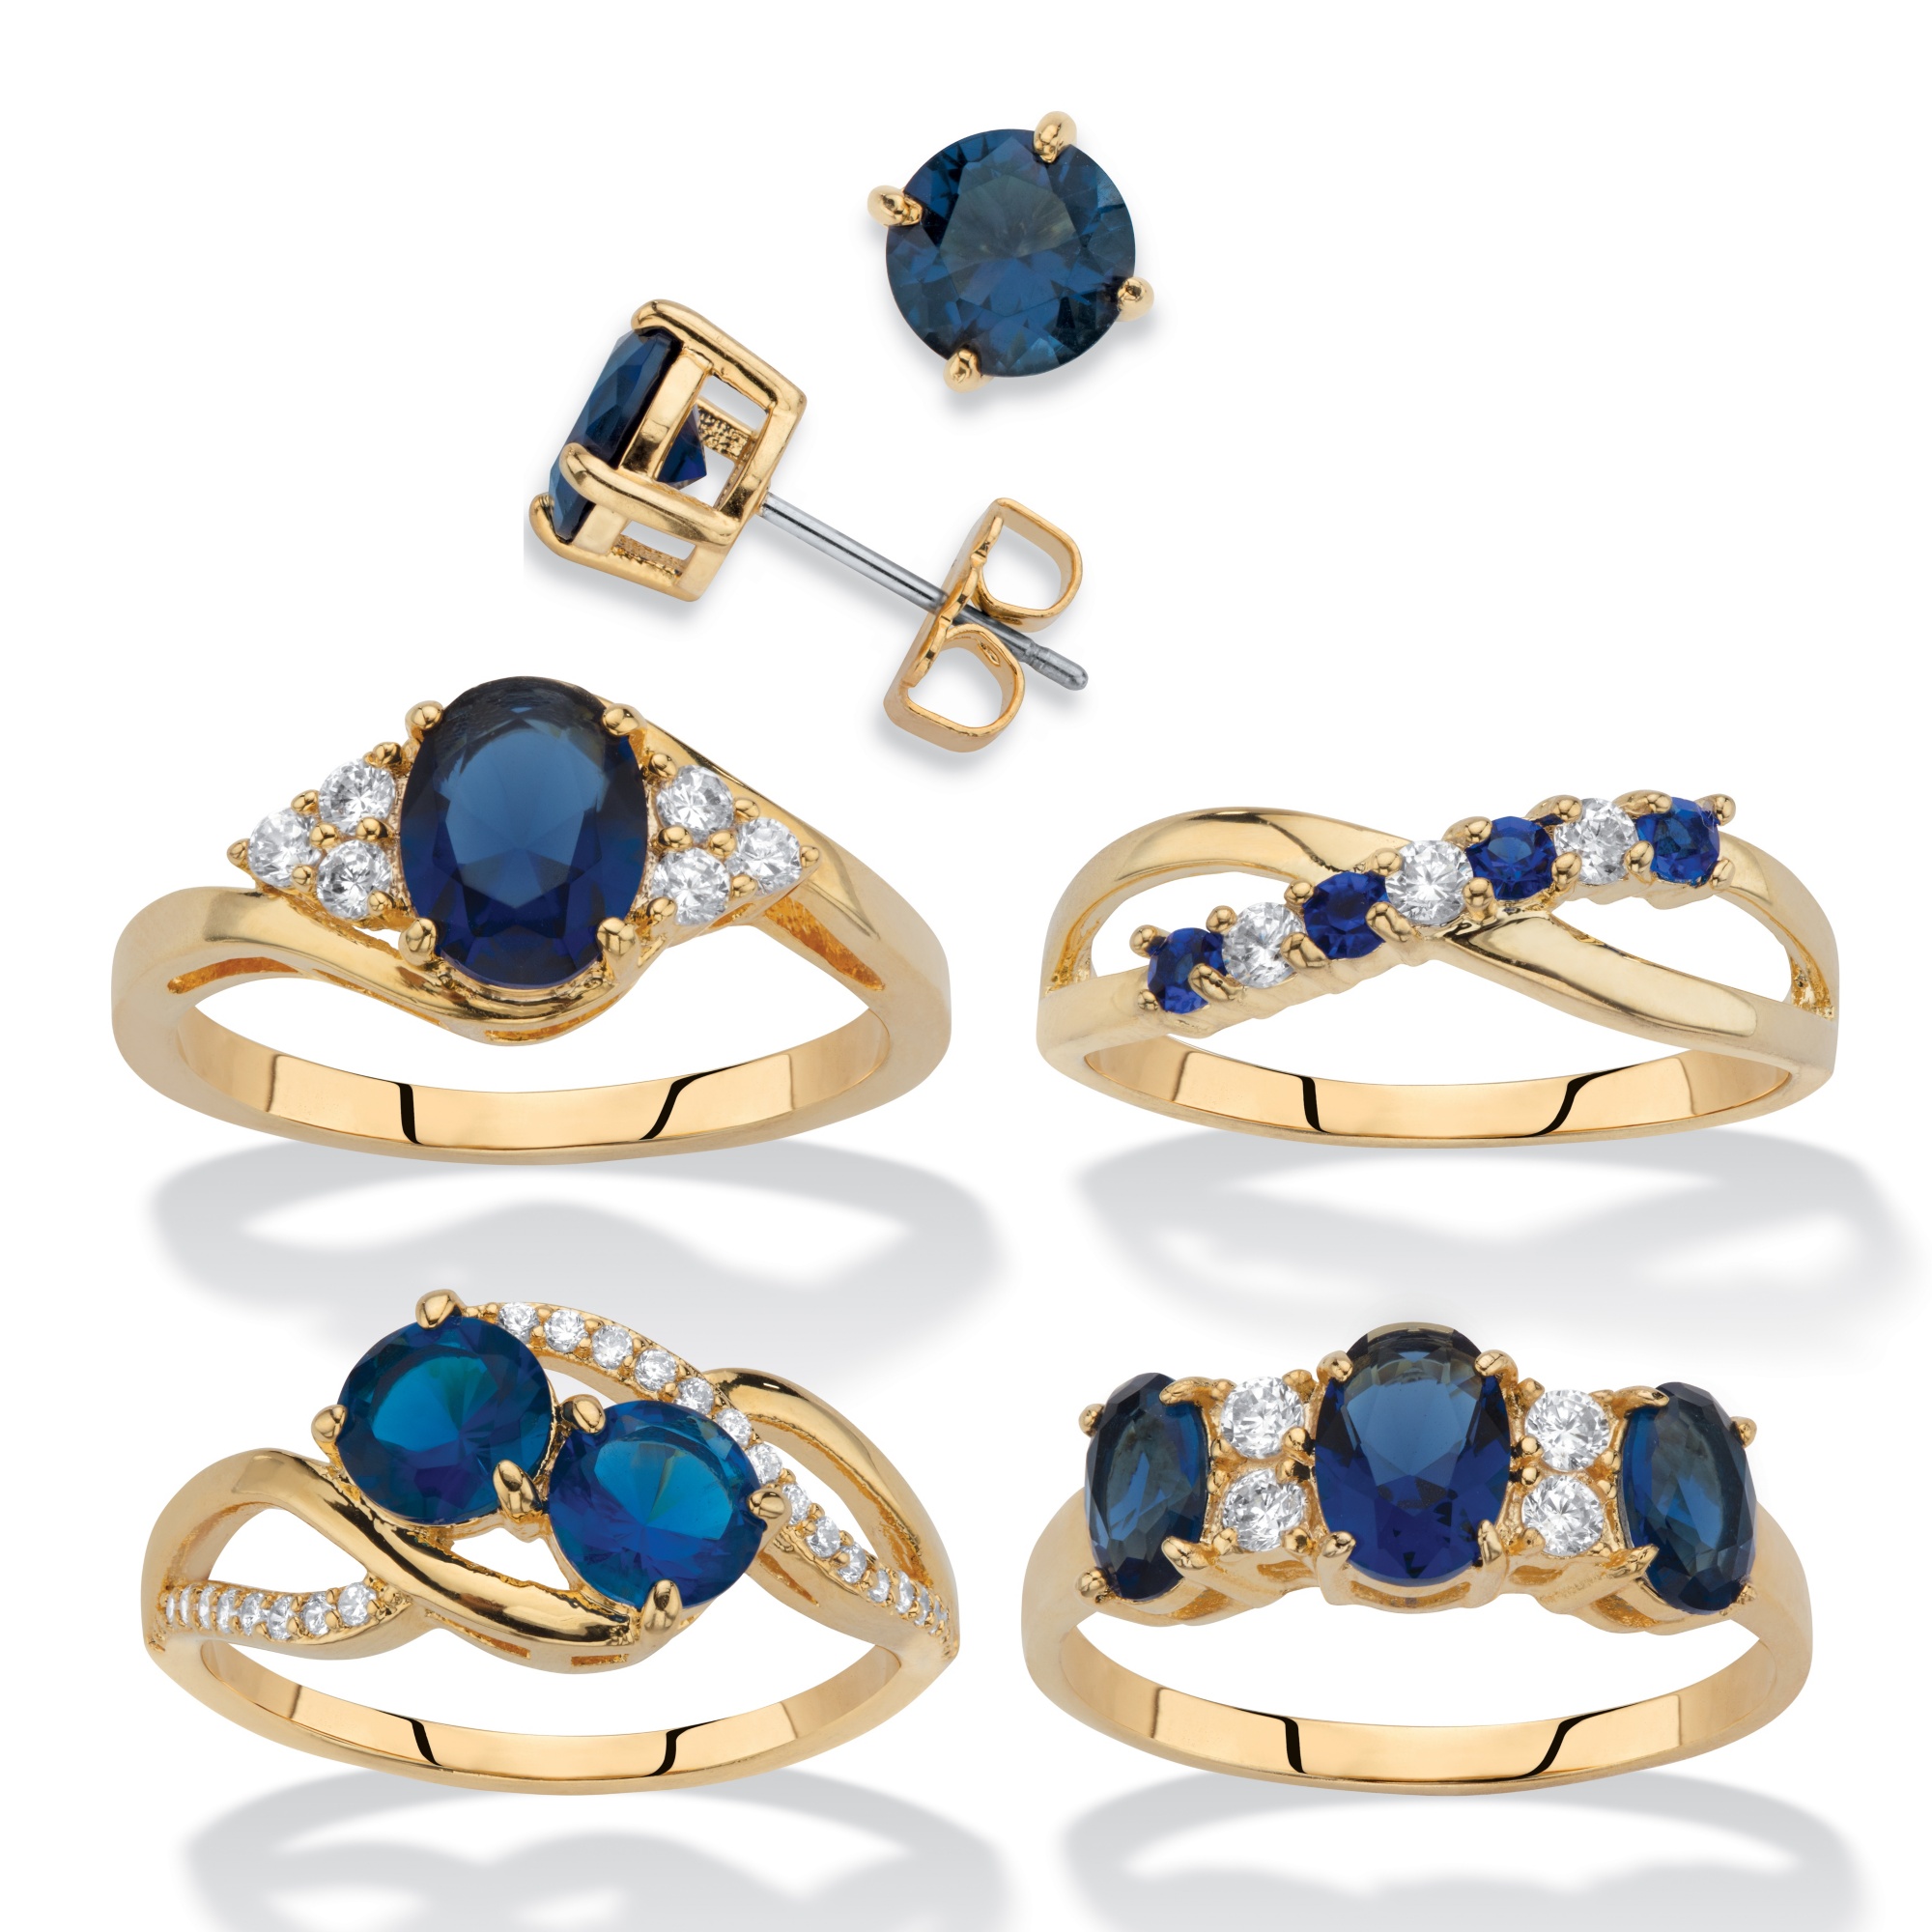 Oval Cut Simulated Blue Sapphire With Cubic Zirconia Halo Stud Earrings In 14K Gold Over Sterling Silver 